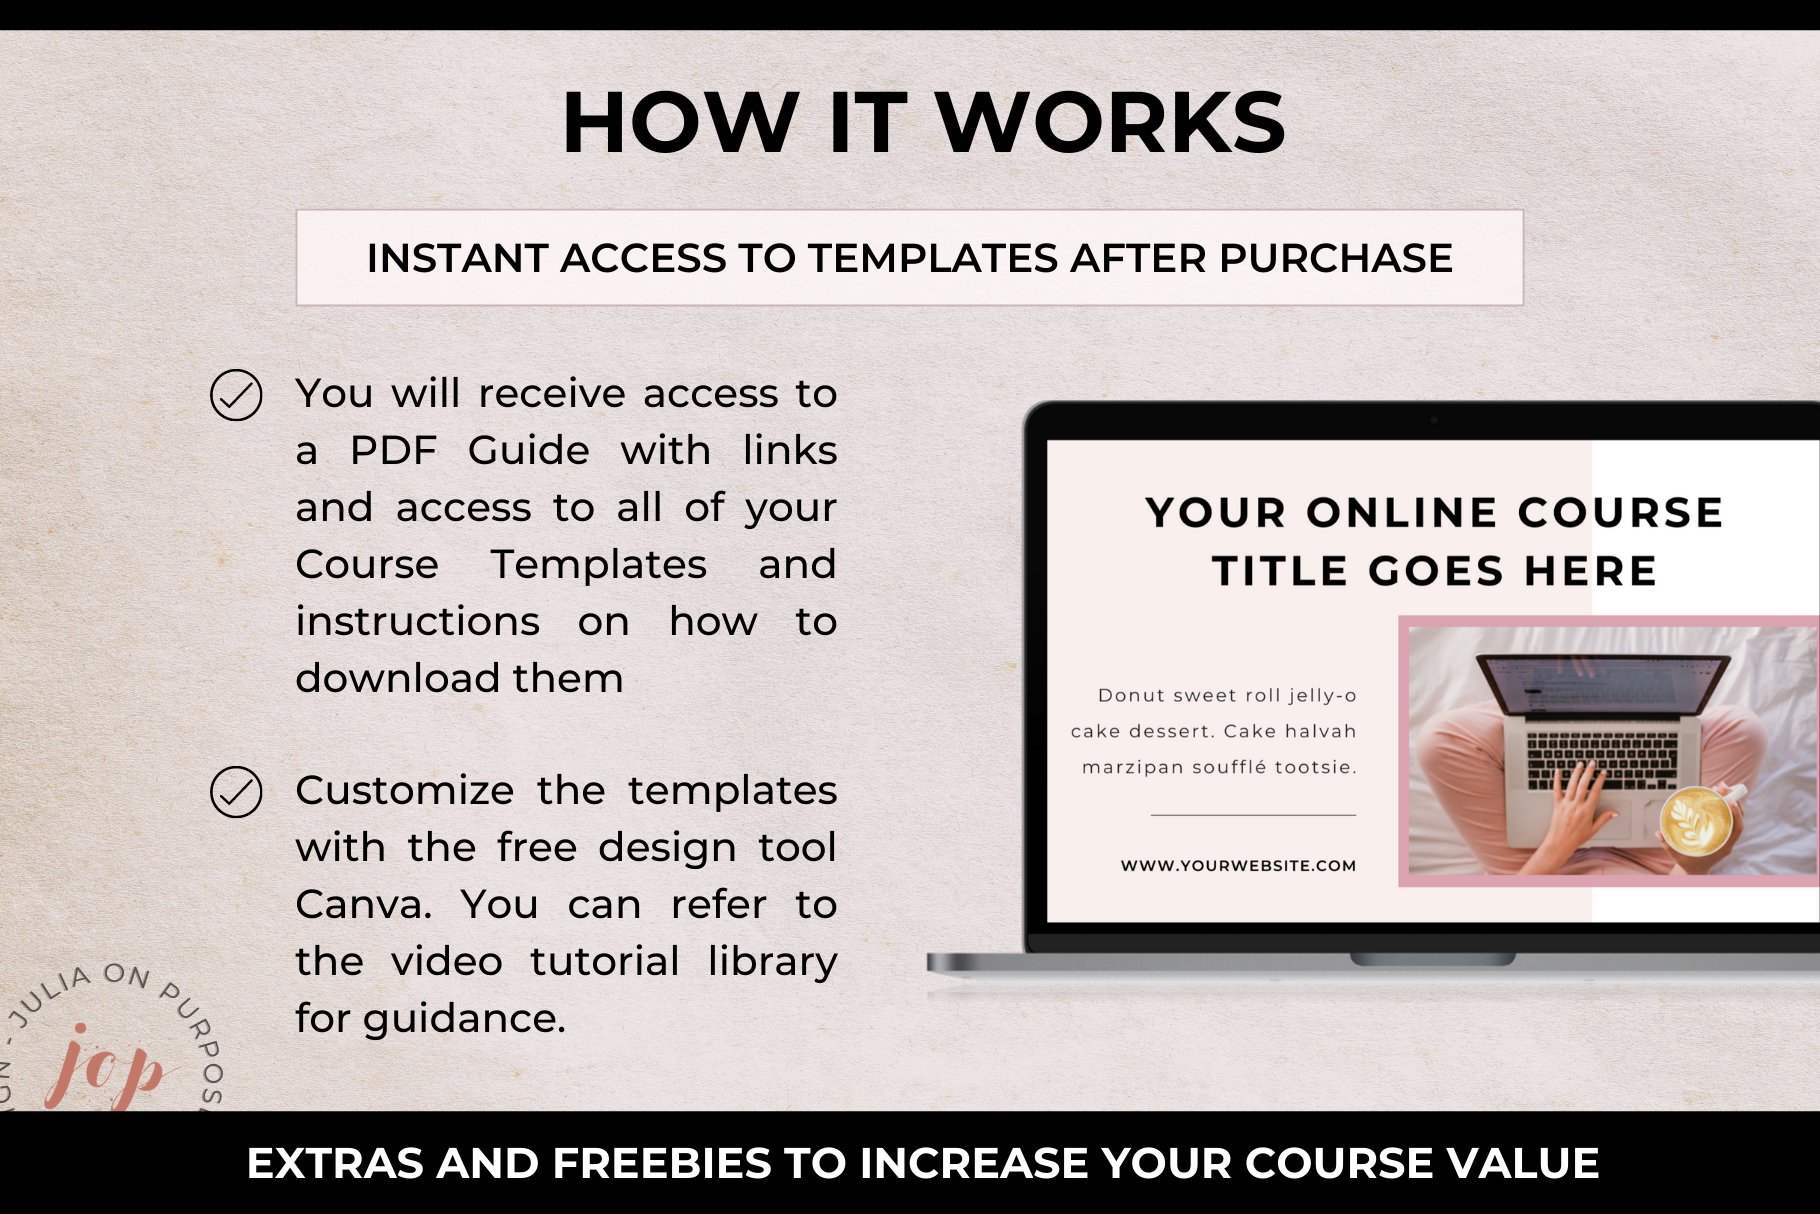 You'll get instant access to templates after purchase.